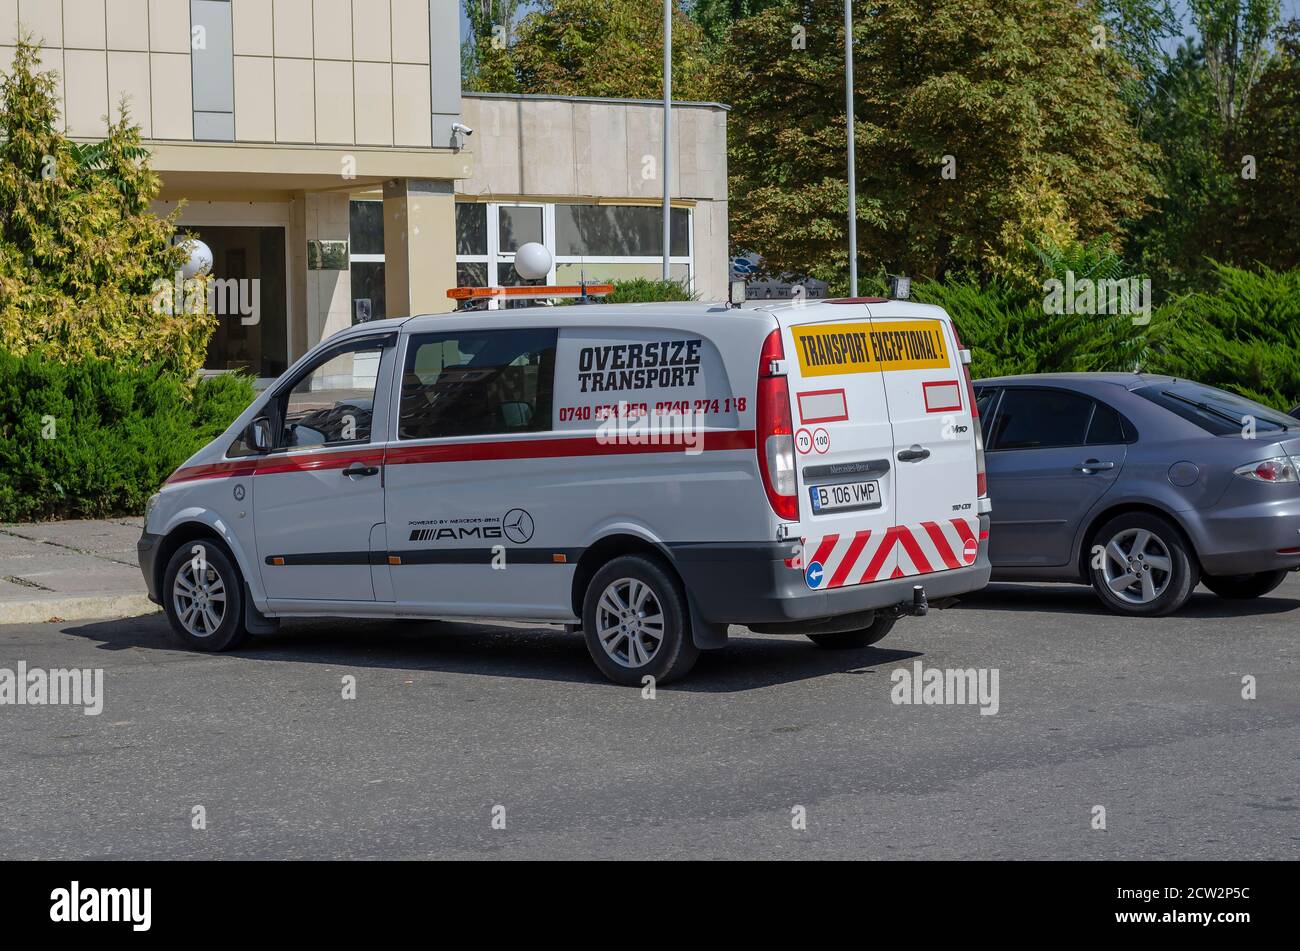 Nikolaev, Ukraine - September 19, 2020: Pilot Vehicle Escorting Oversize Transports in the parking lot at the hotel. Mercedes Benz Vito 110 CDI with s Stock Photo